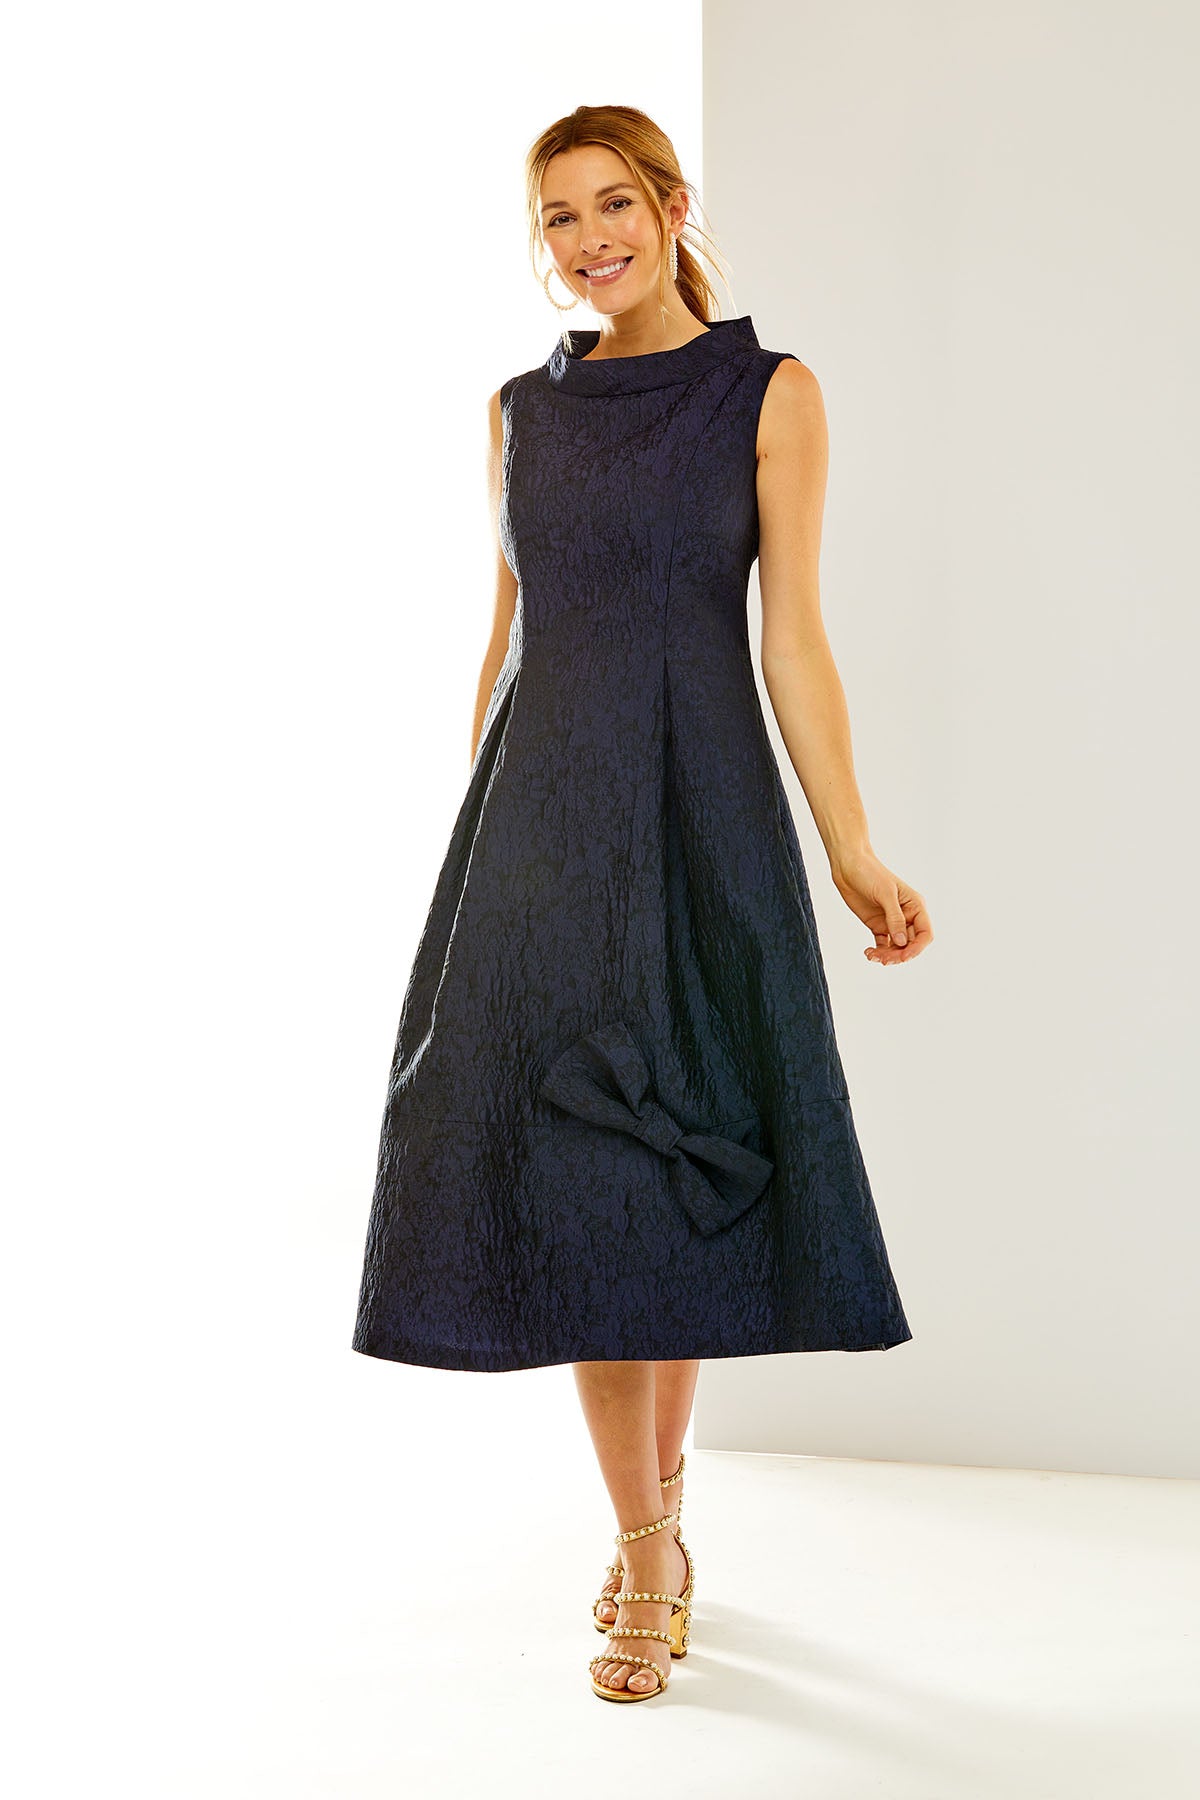 The Claire Dress in Navy Jacquard